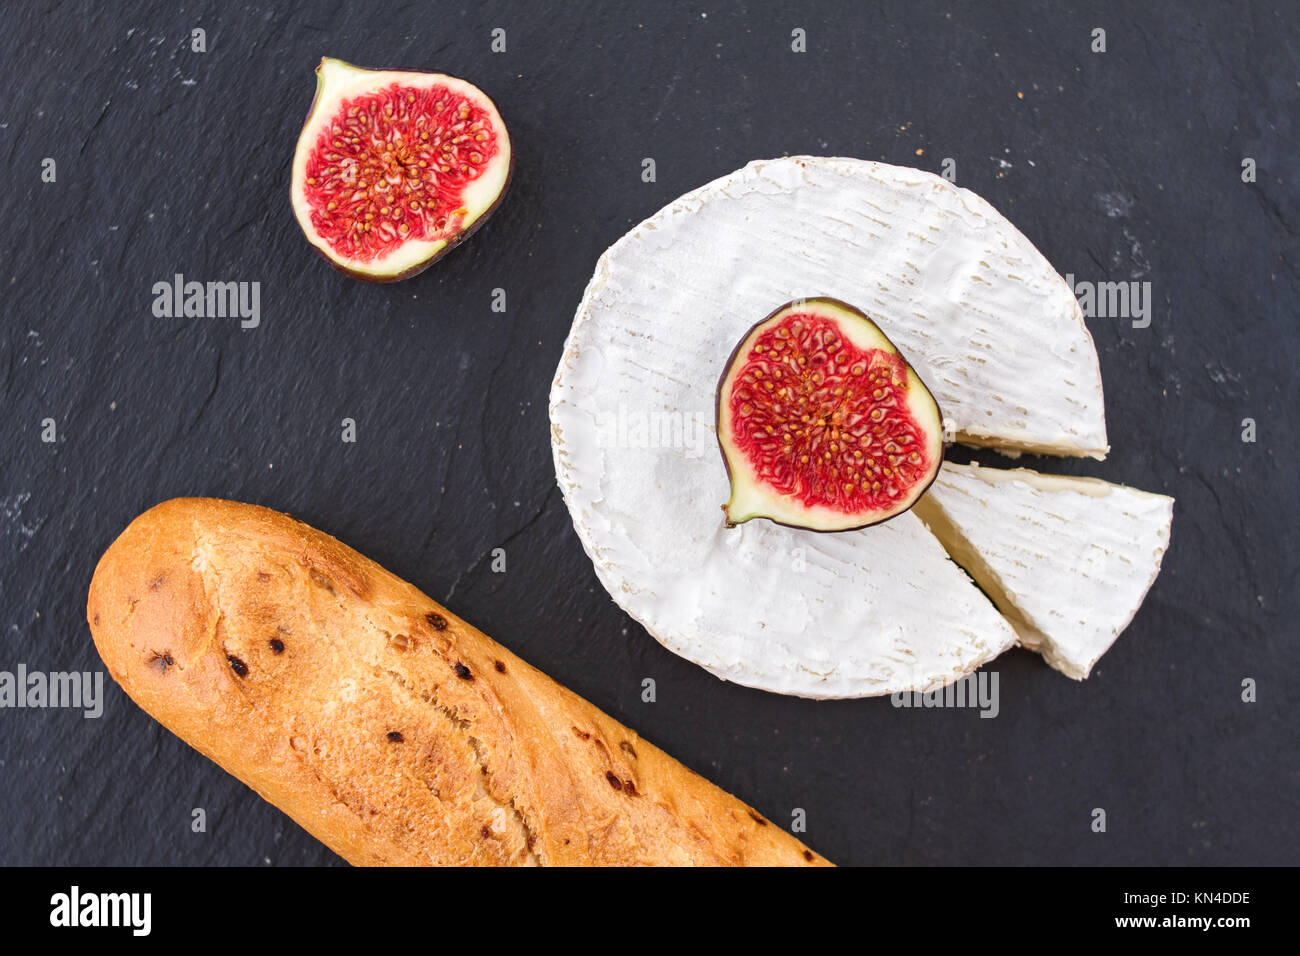 Bright juicy ripe pieces of fig fruit and creamy Swiss camembert cheese and a crispy golden fresh onion baguette for breakfast. Stock Photo